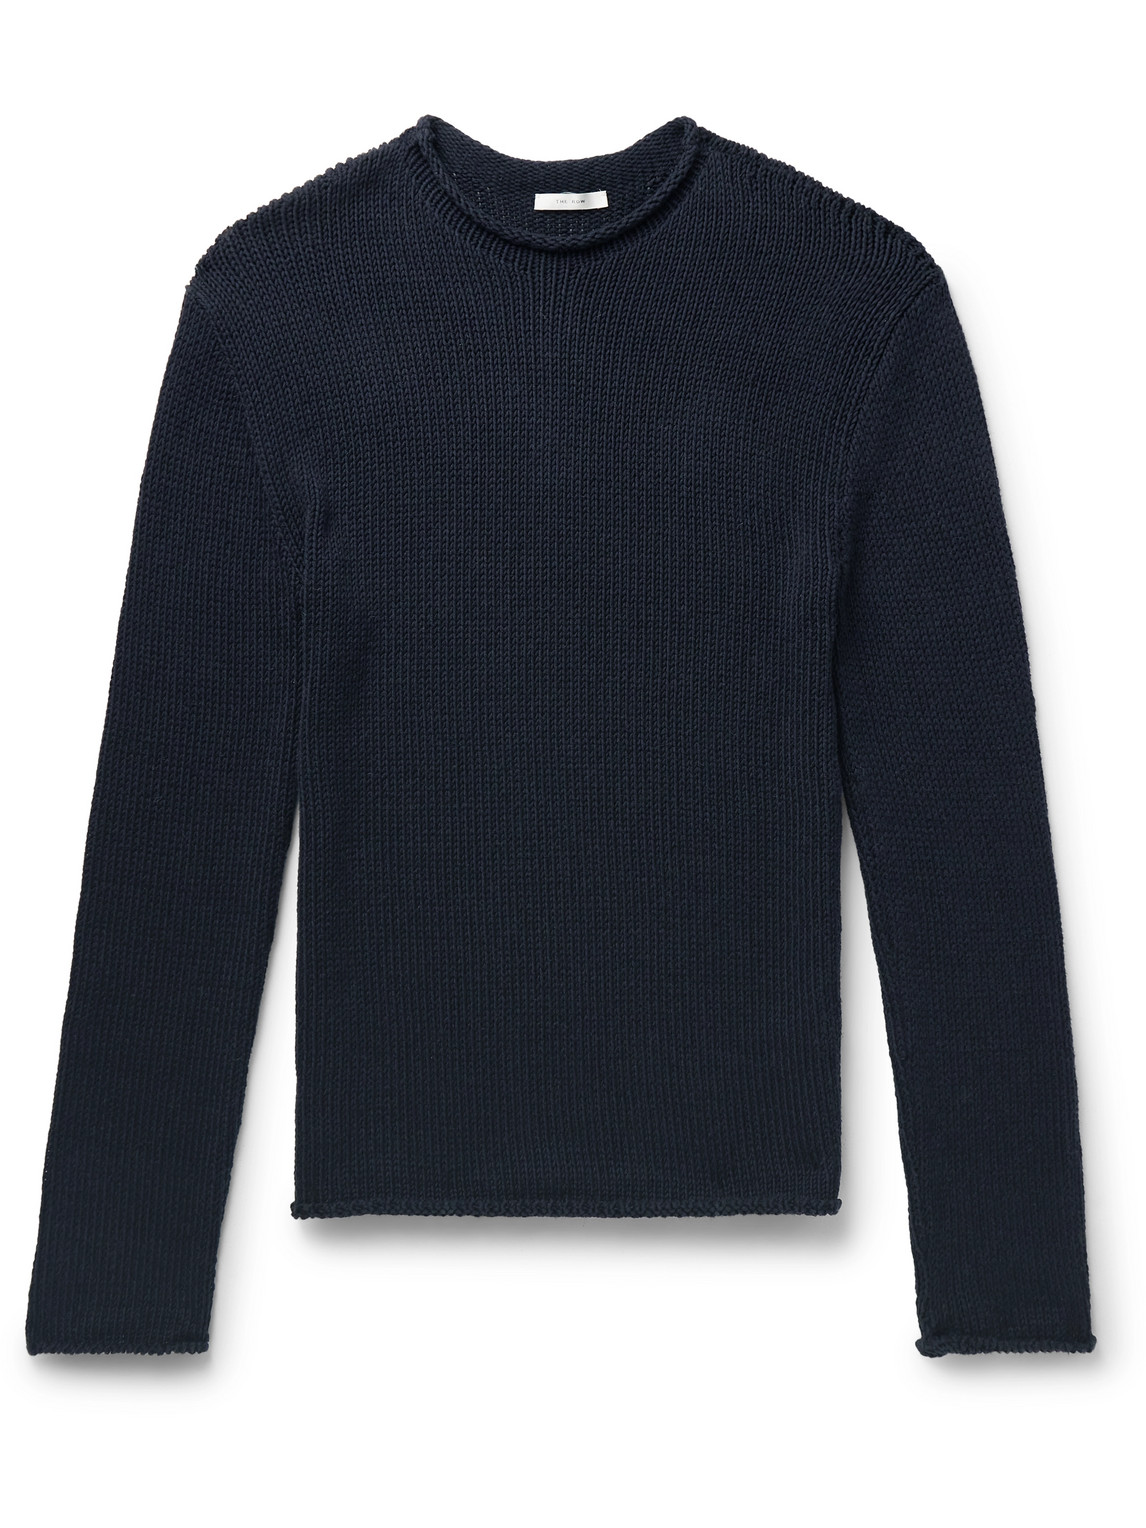 The Row - Anteo Cotton and Cashmere-Blend Sweater - Men - Blue - L von The Row